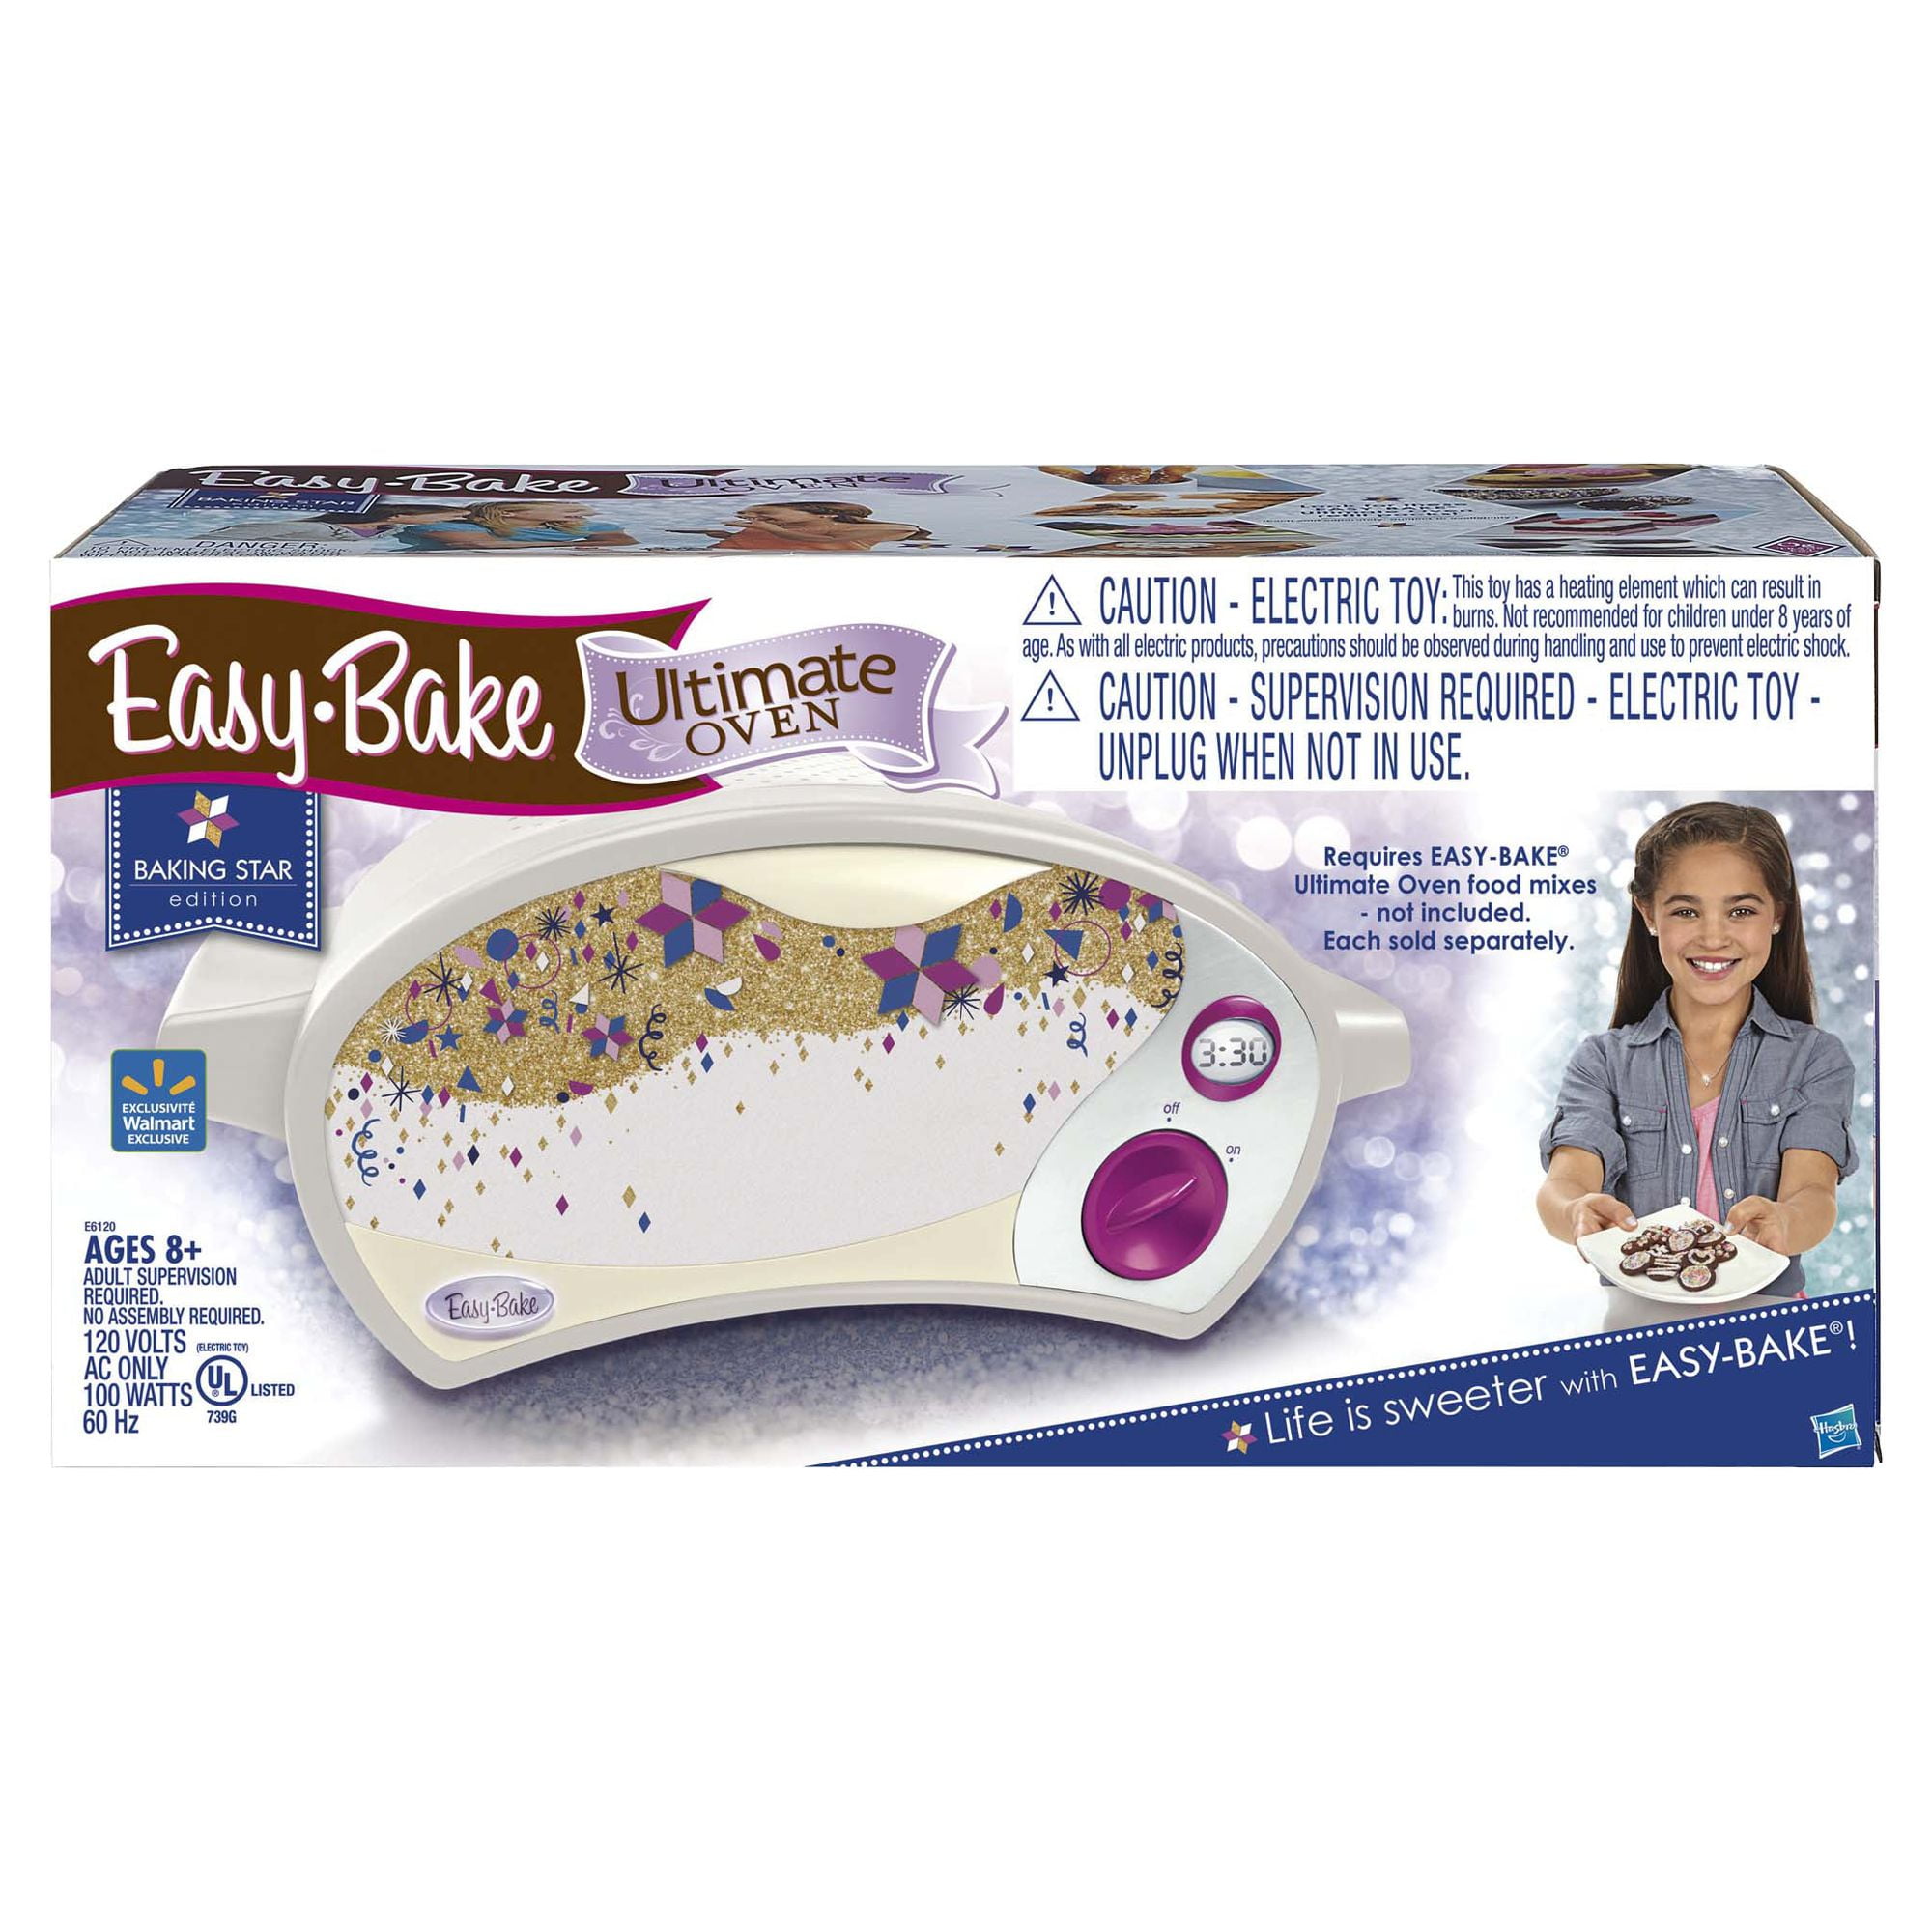 Easy-Bake Ultimate Oven Toy, Baking Star Edition, for Kids Ages 8 and Up 